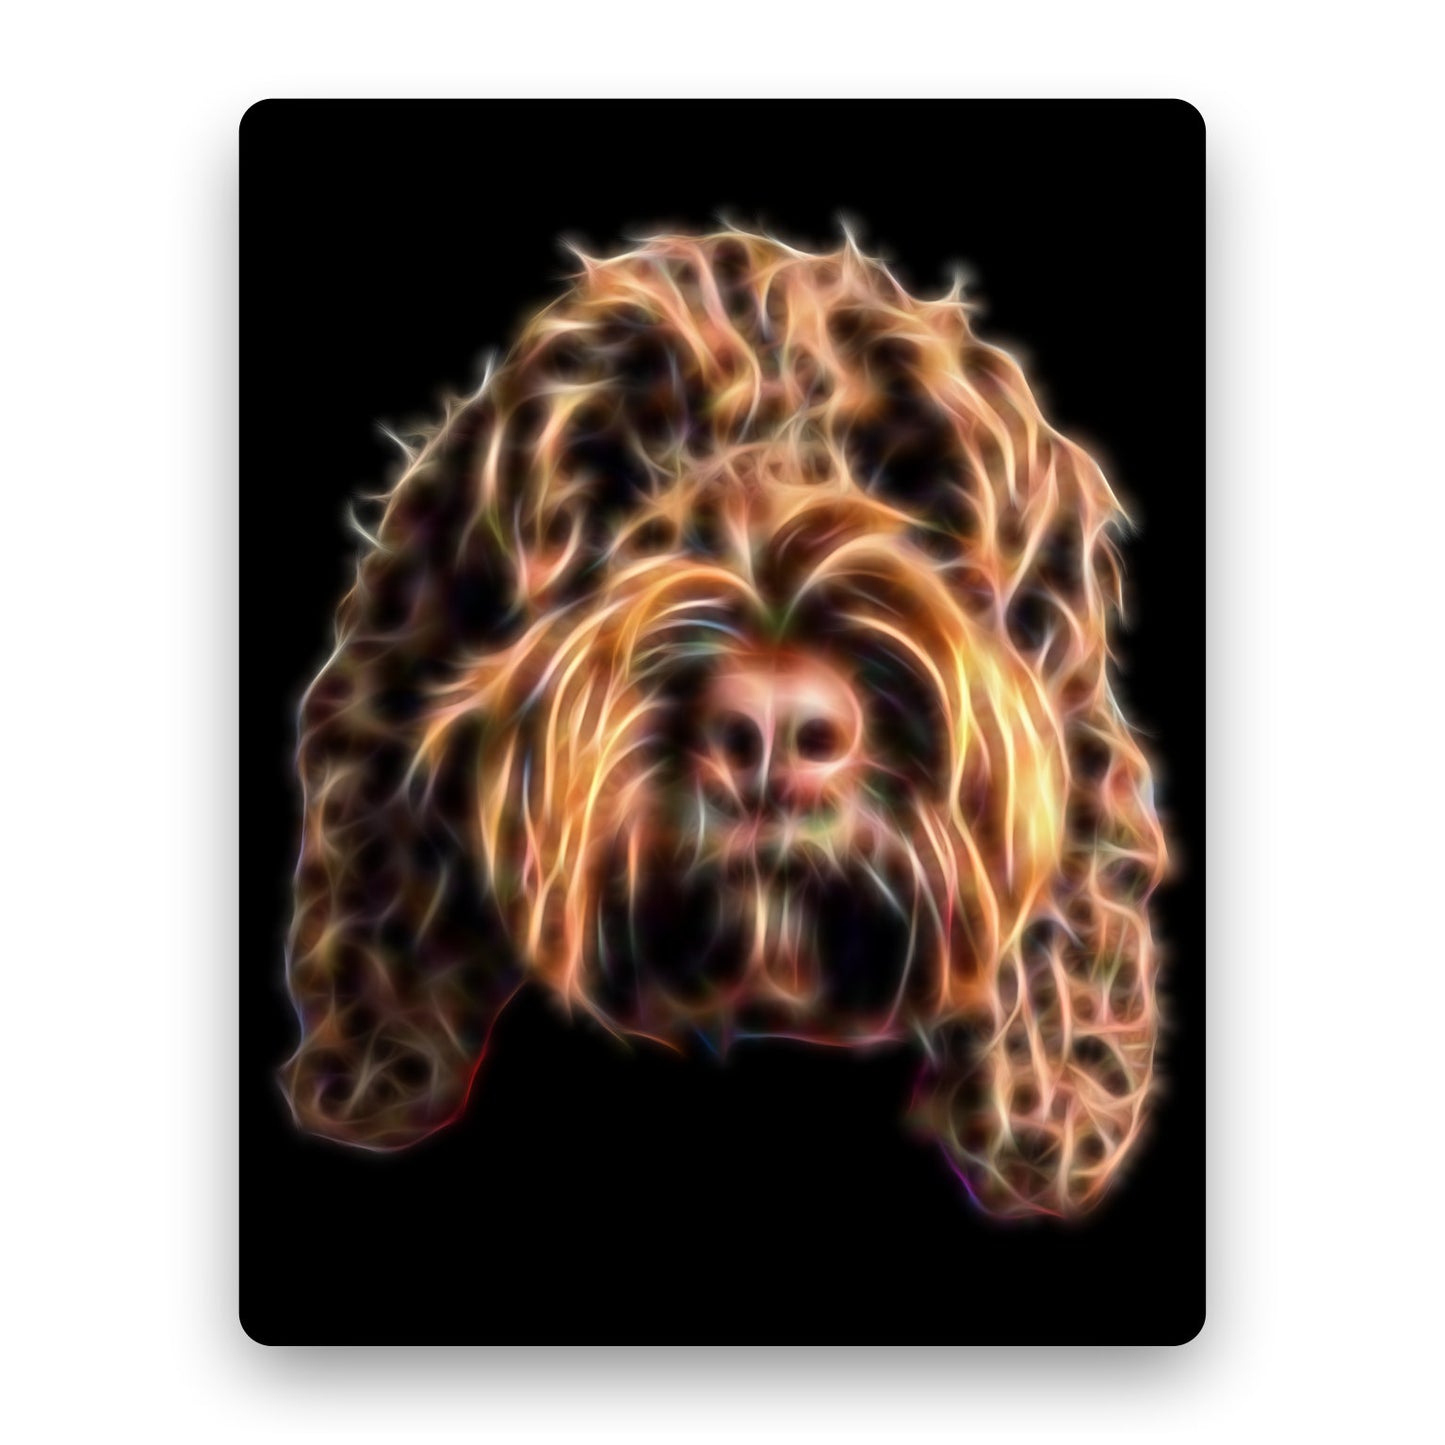 Chocolate Cockapoo Metal Wall Plaque with Stunning Fractal Art Design. Perfect Gift for Cockapoo Owner.